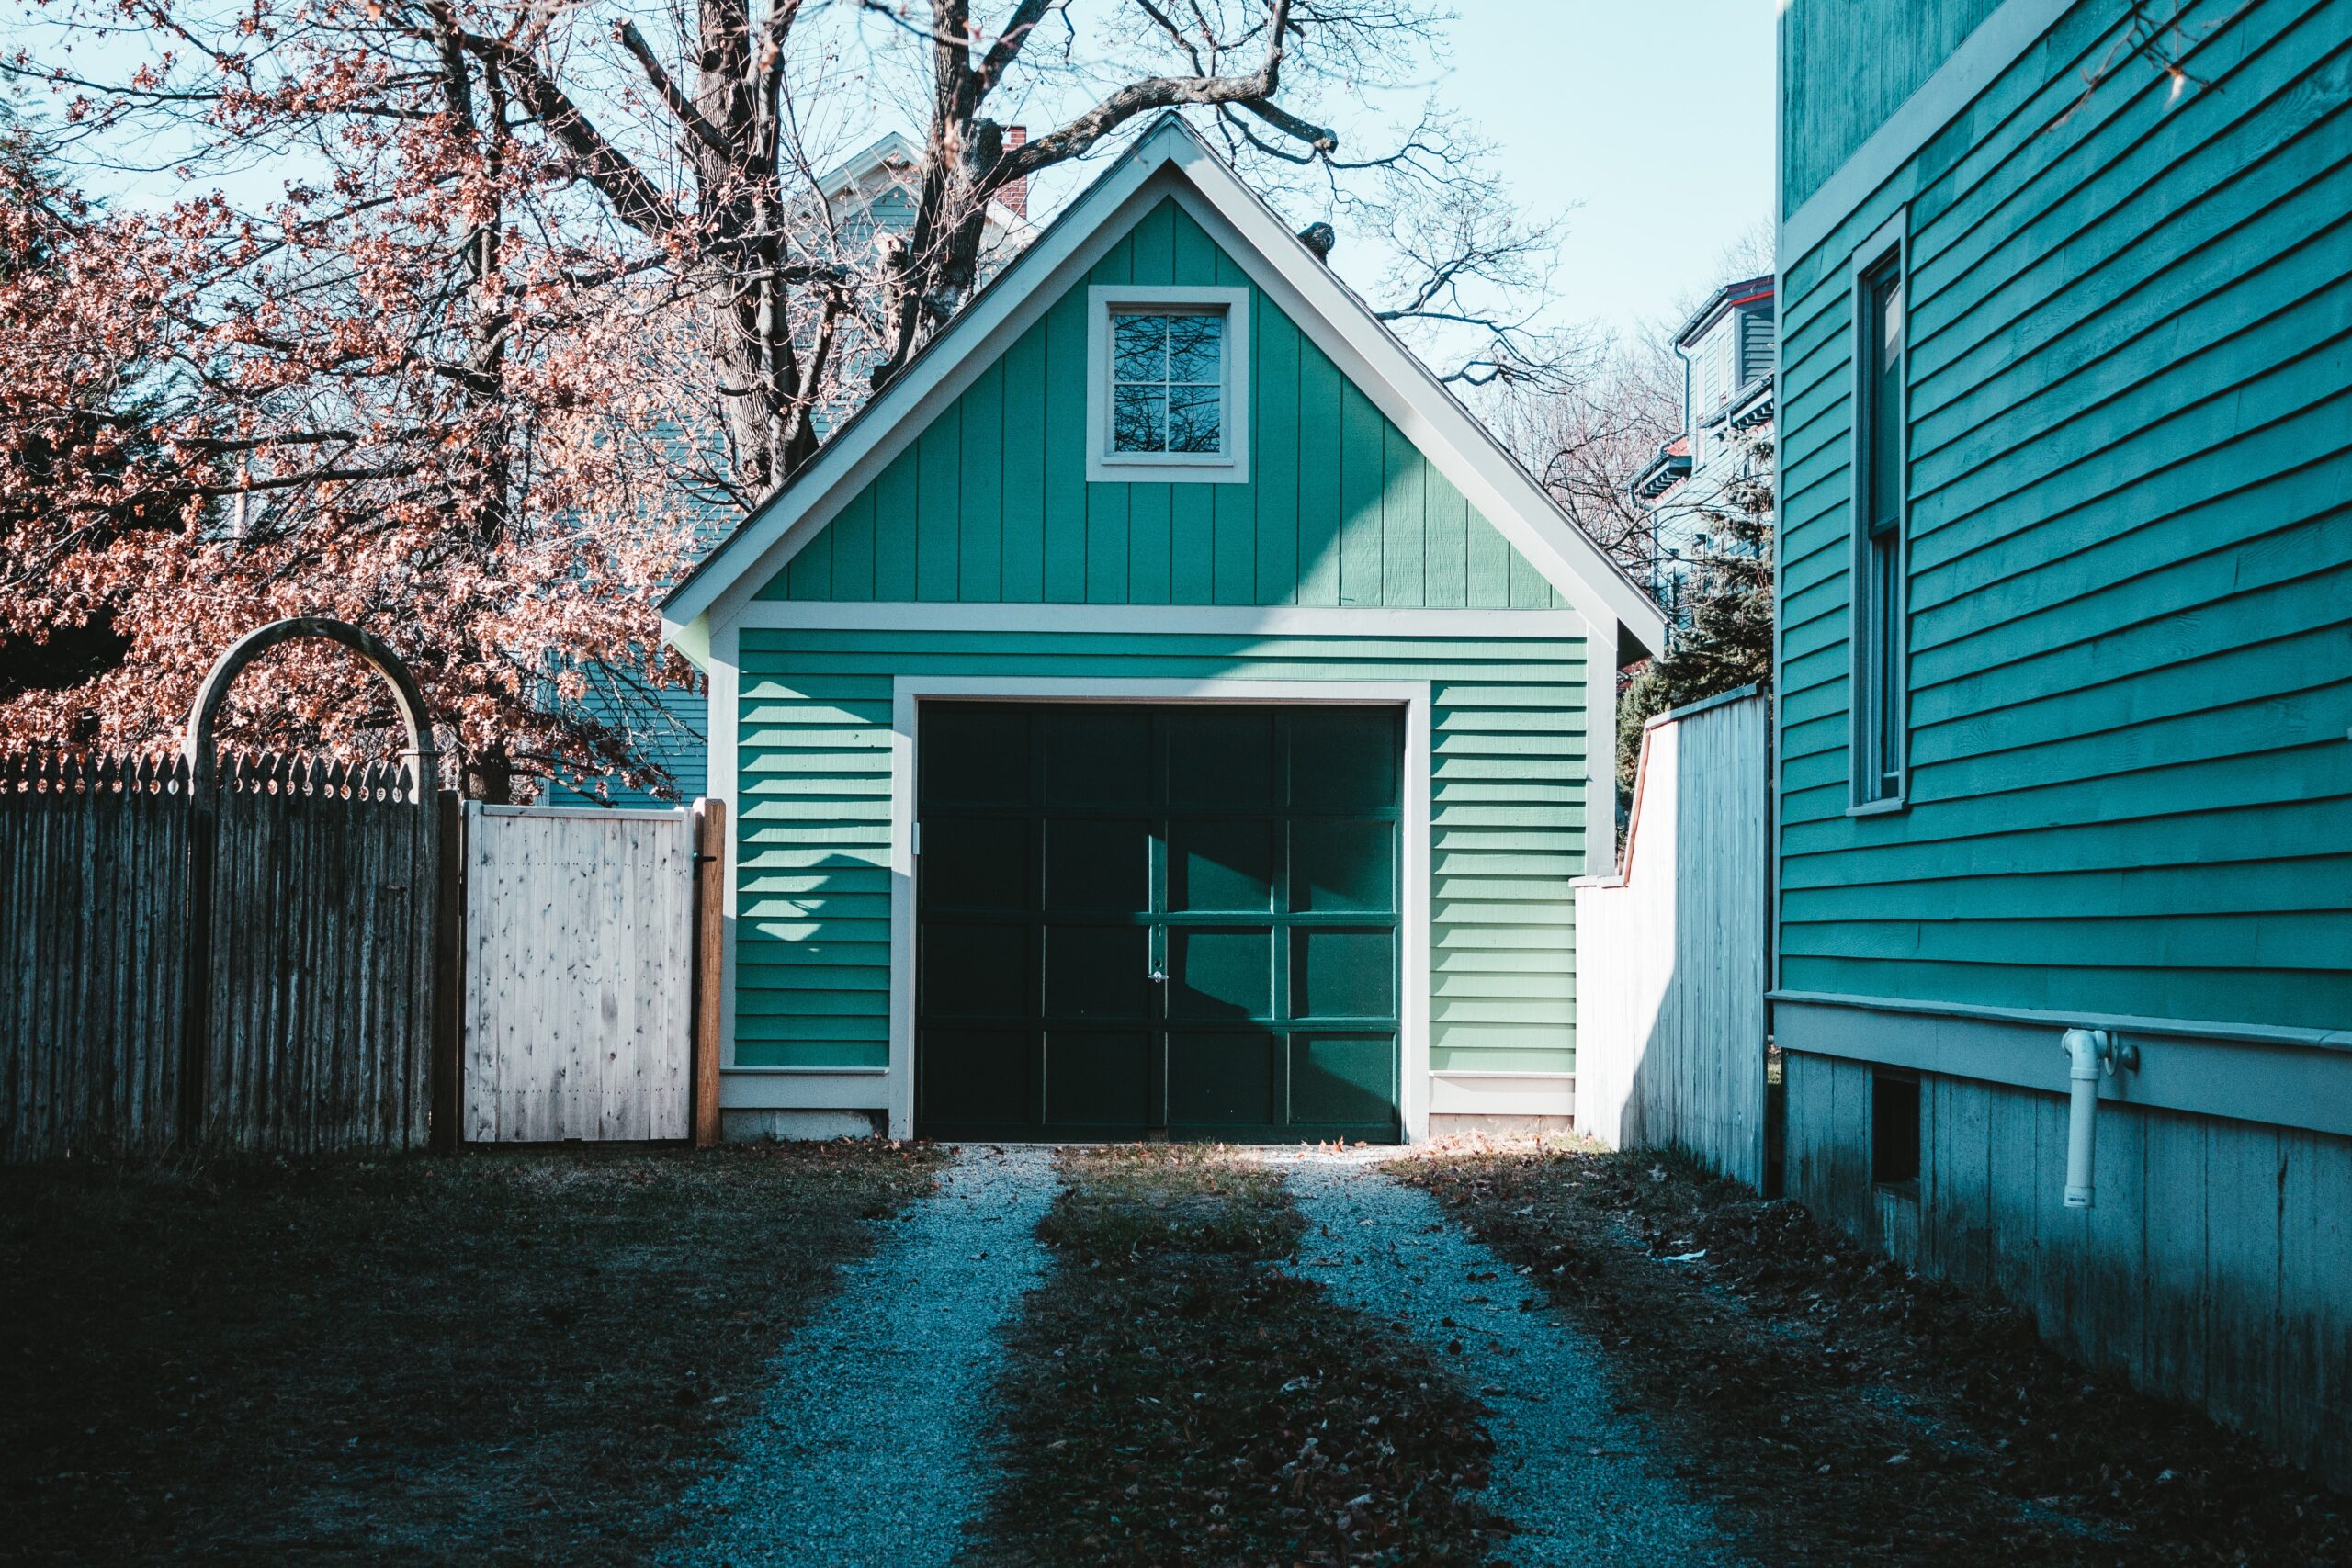 An insulated garage door can make a big difference in the energy efficiency of your home. Consider purchasing with Rainier Garage Door when it's time to renovate this often neglected area of your home.